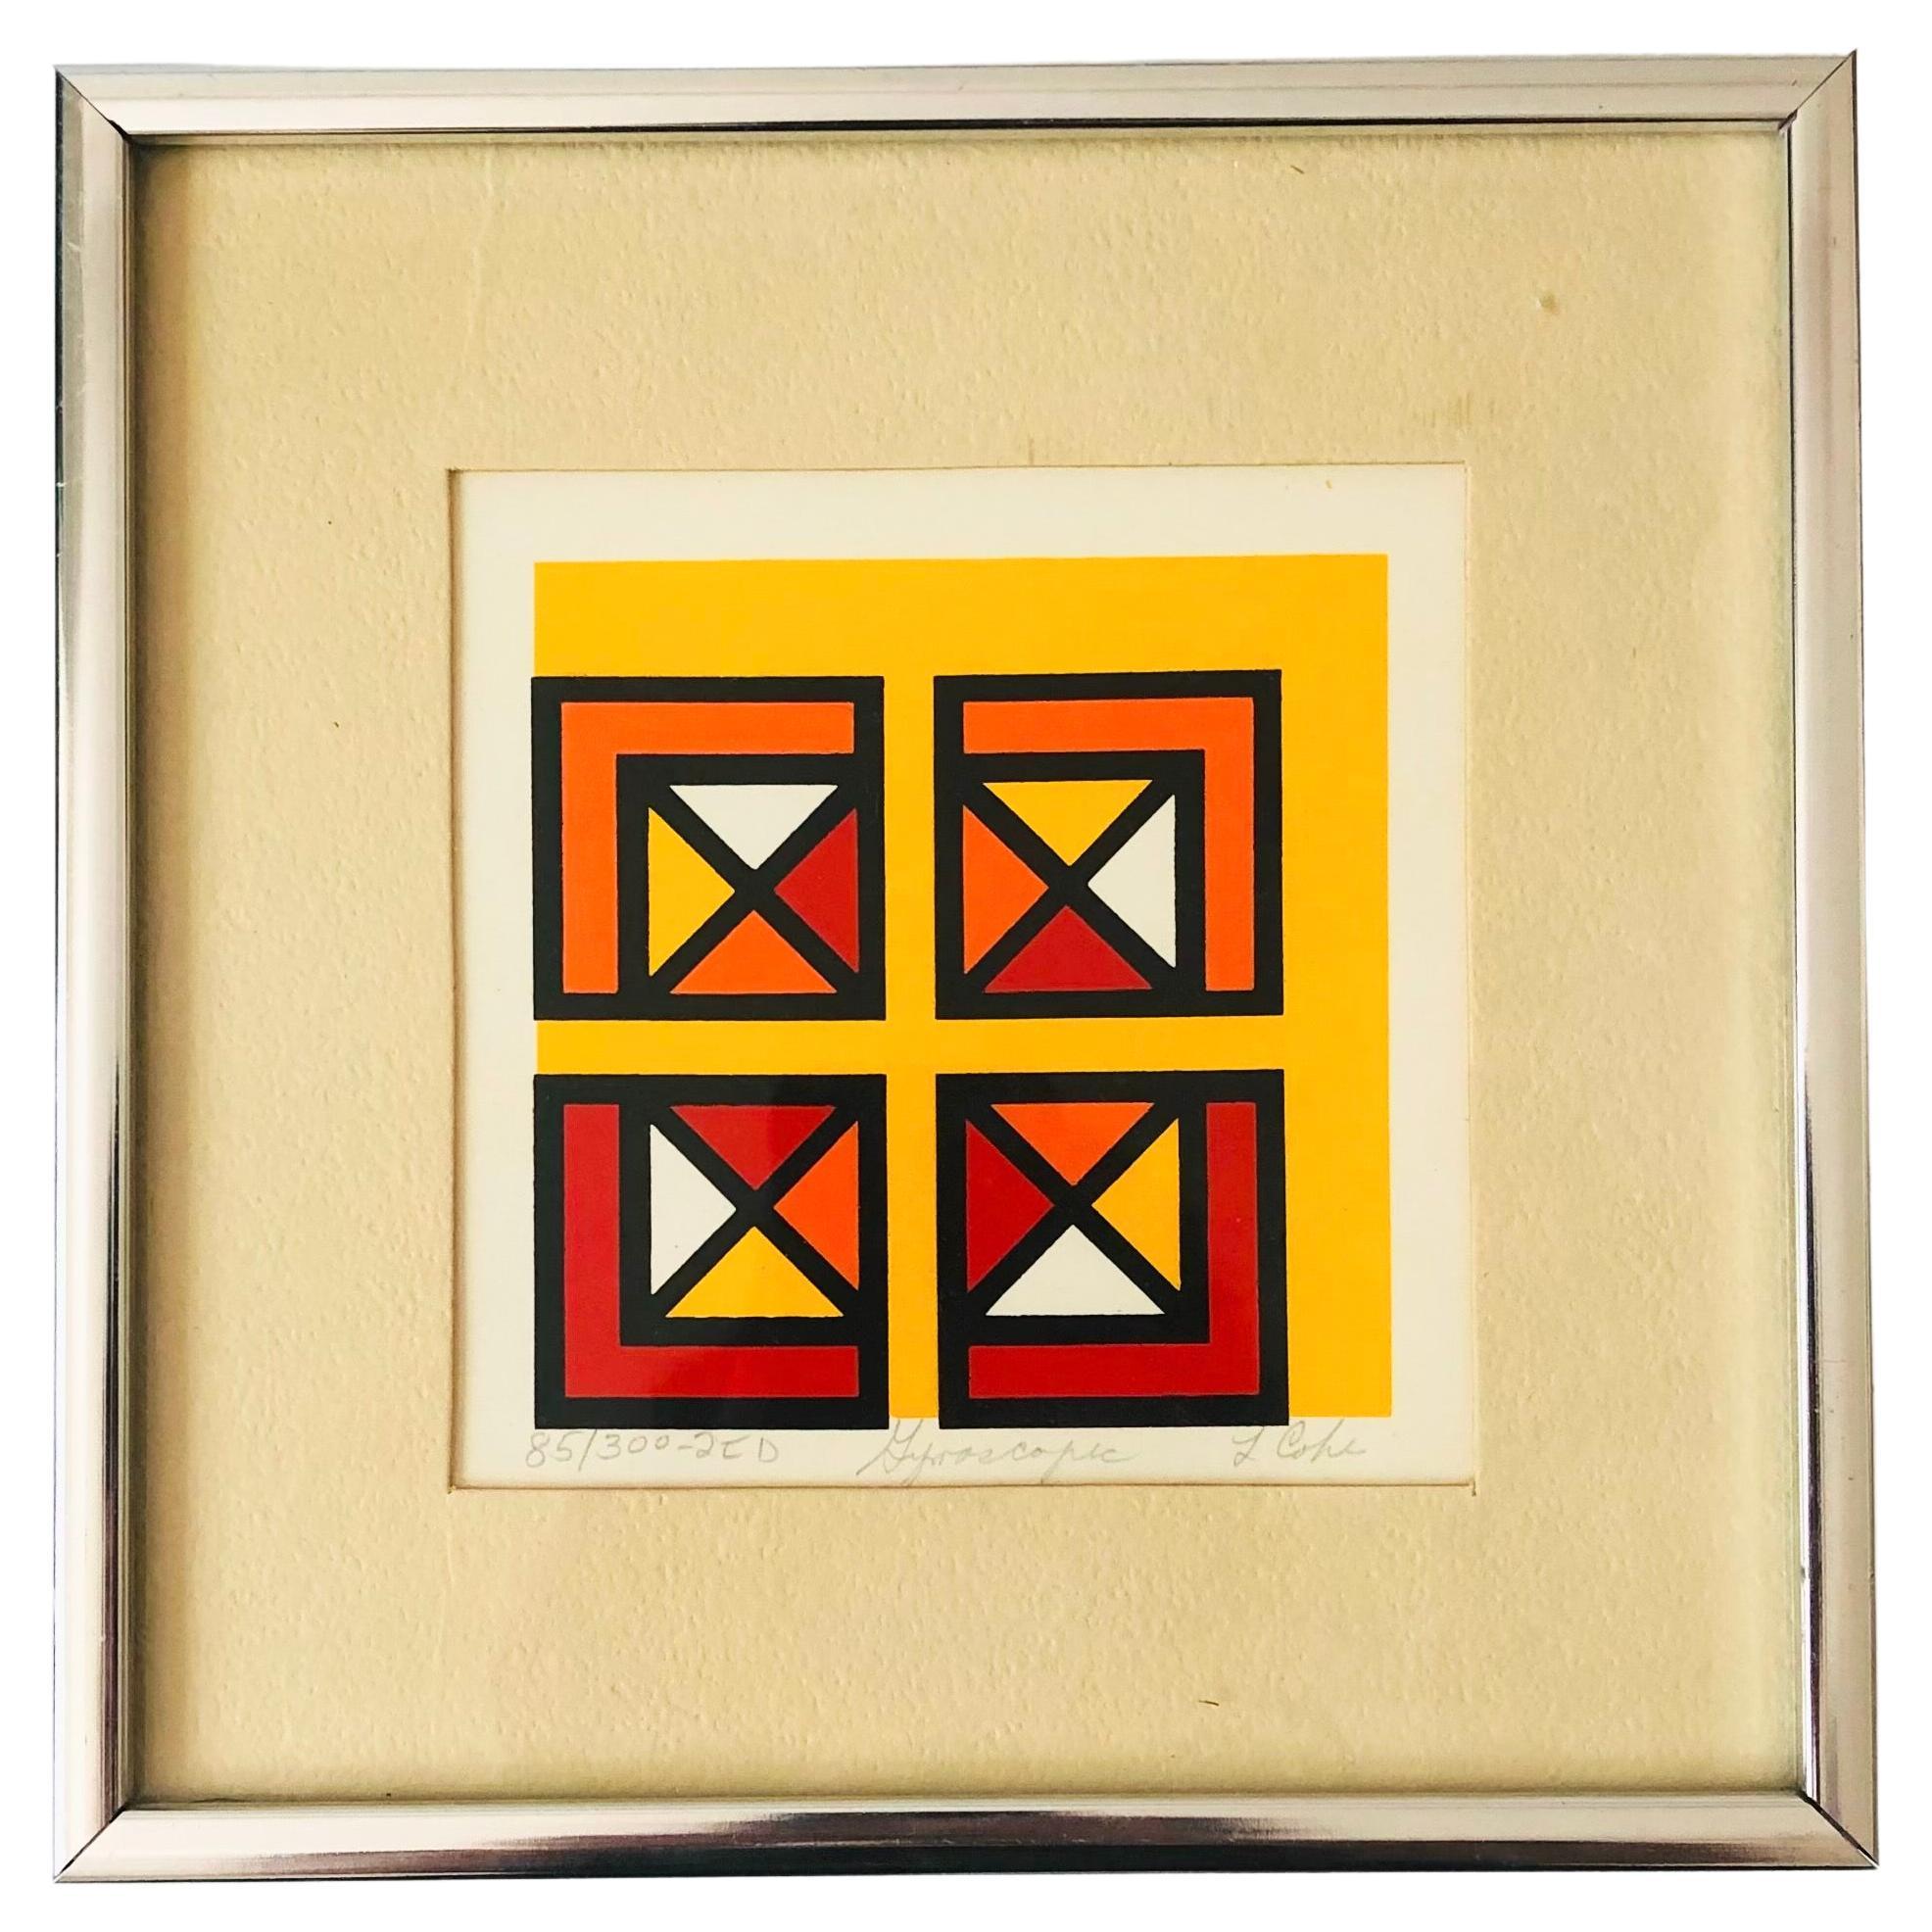 1970s Geometric Abstract Serigraph by L Cohe Titled "Gyroscopic"